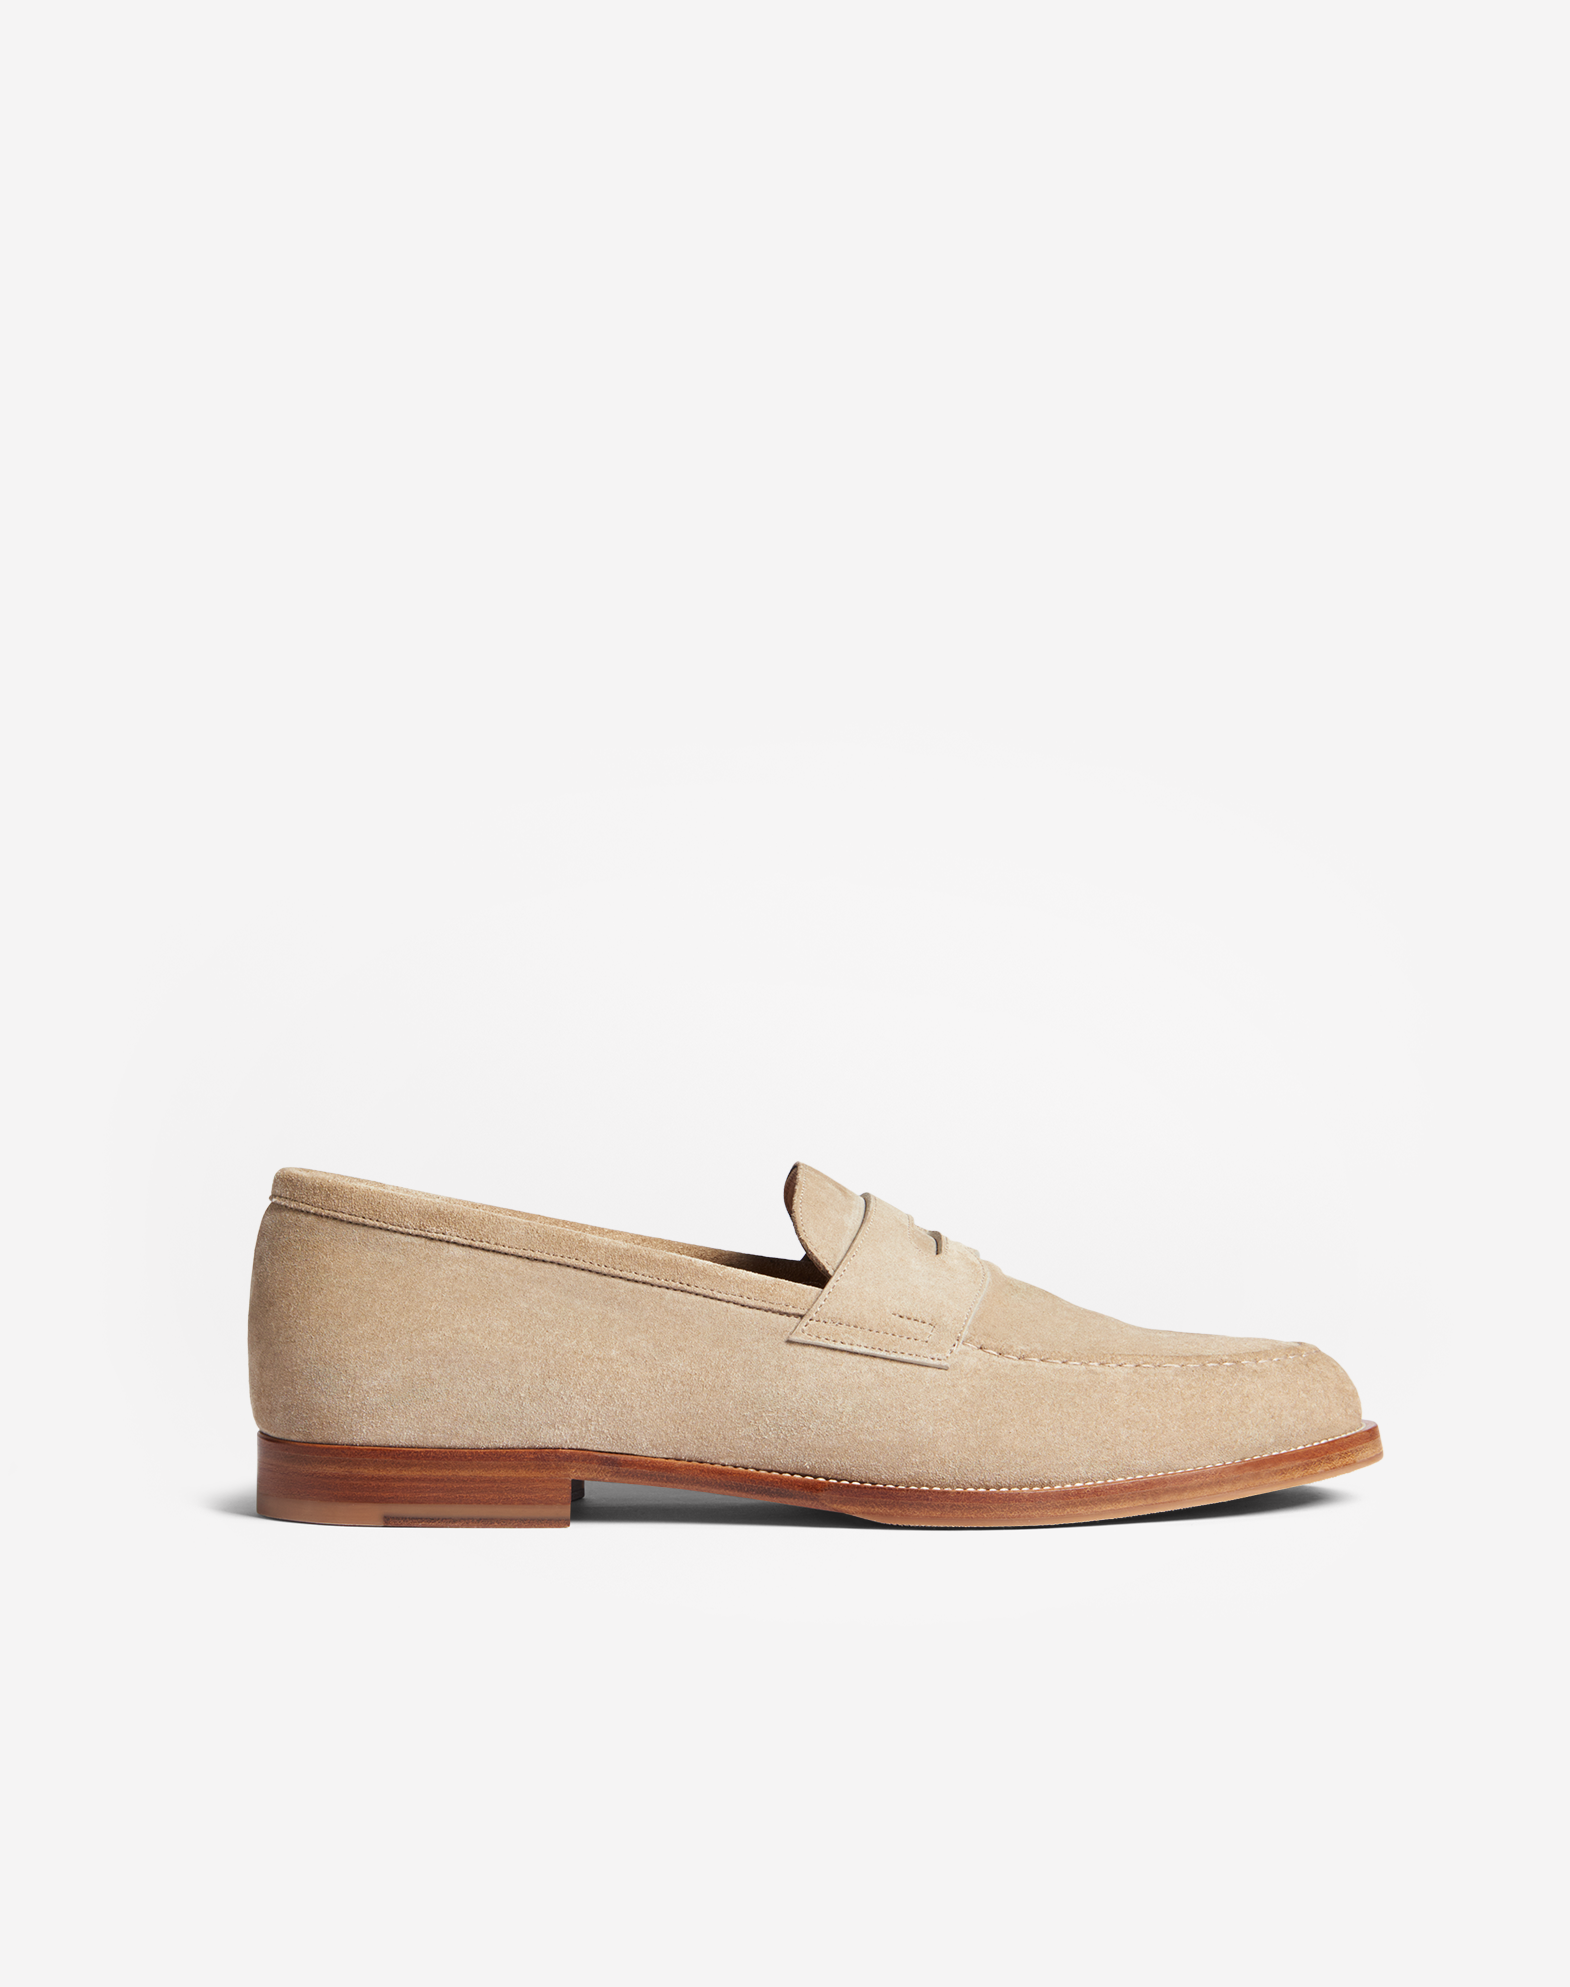 Dunhill Luxury Men's Loafers